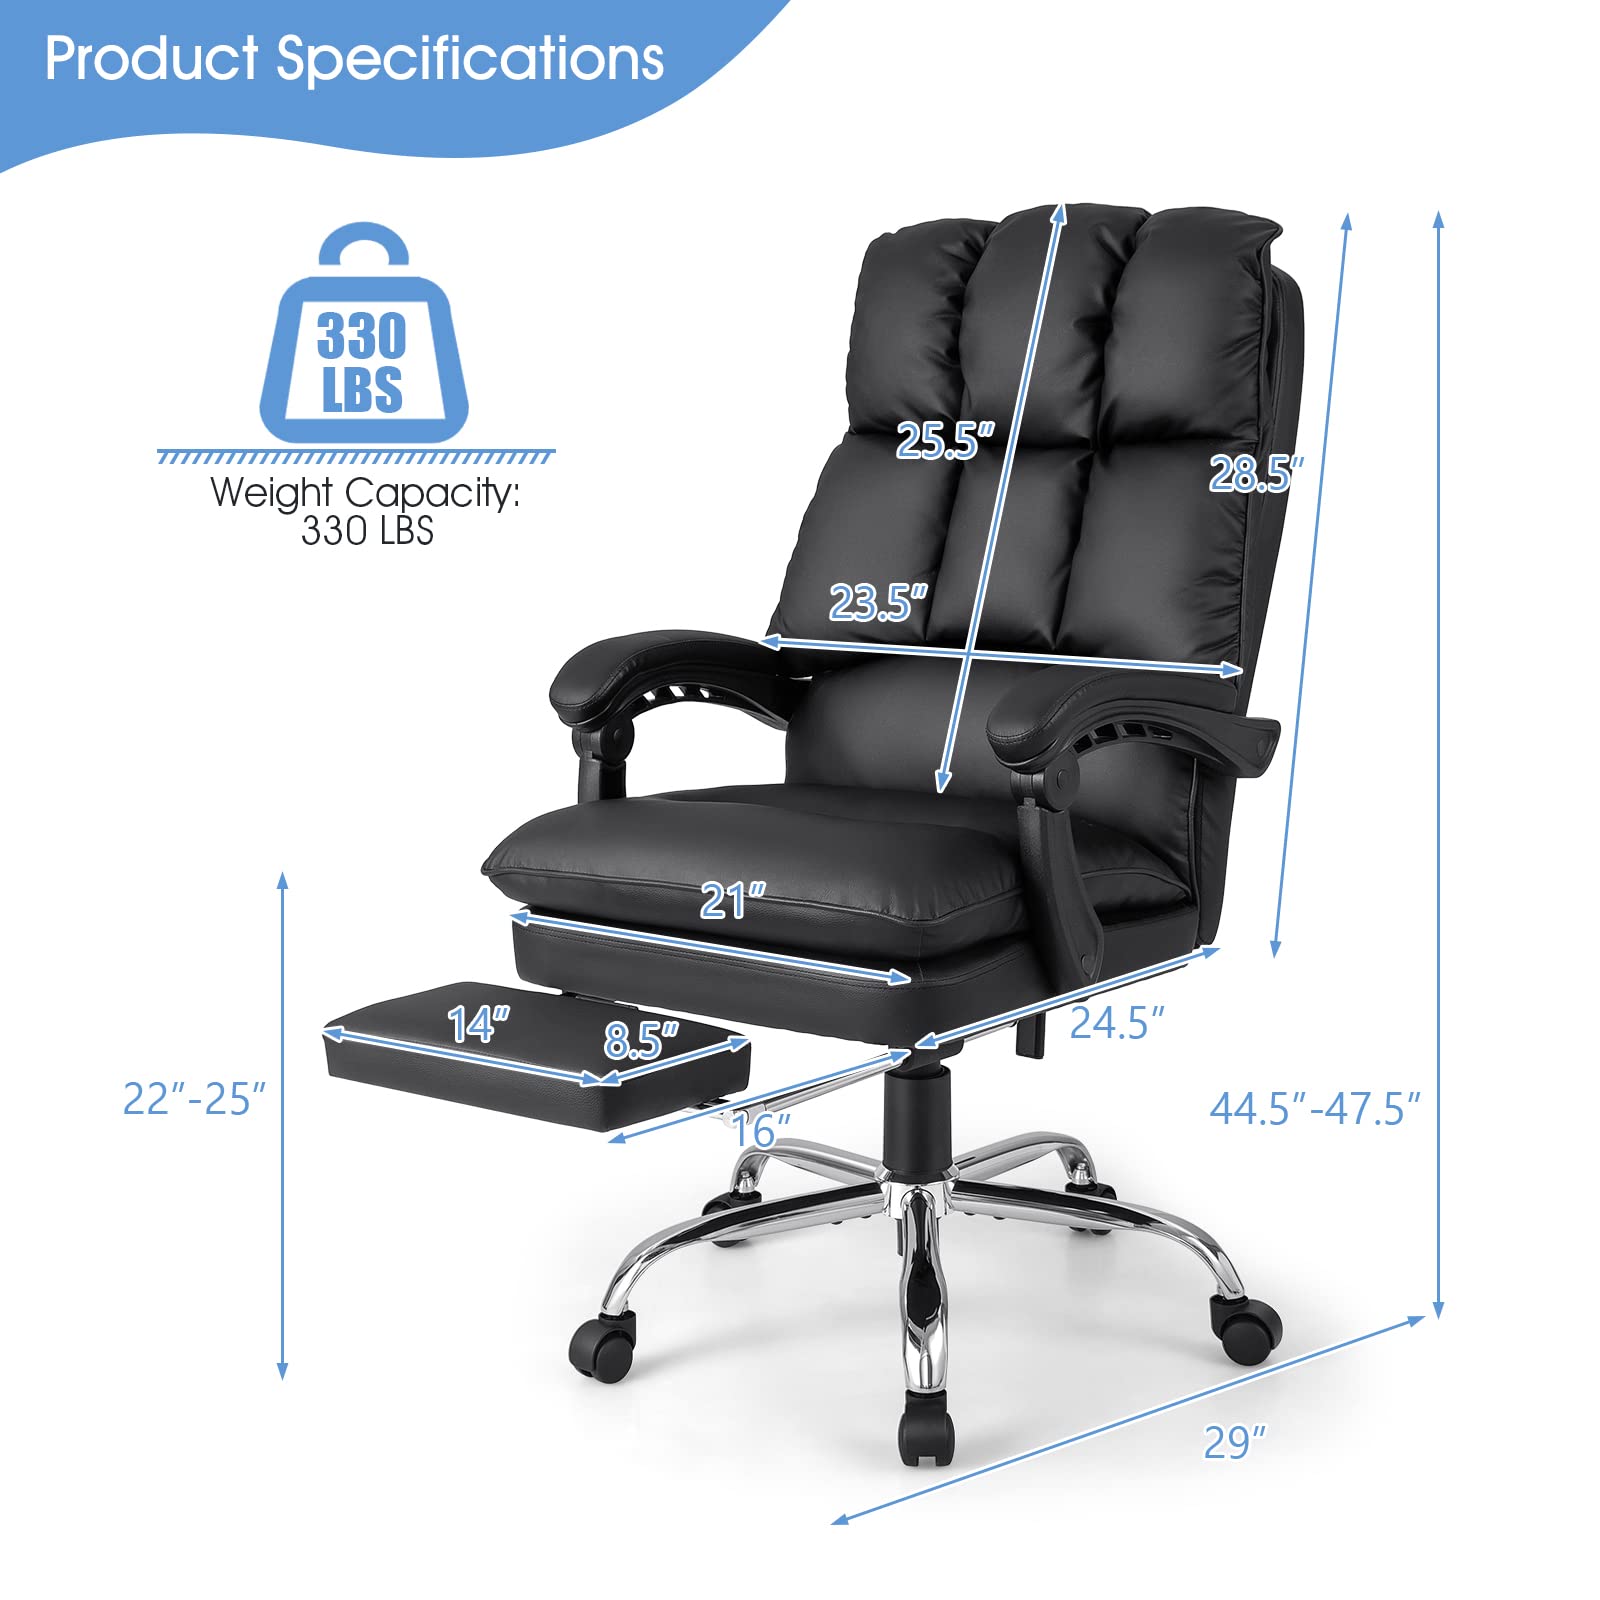 Giantex Executive Office Chair, PU Leather Reclining Chair with Retractable Footrest & Padded Armrests (Black)